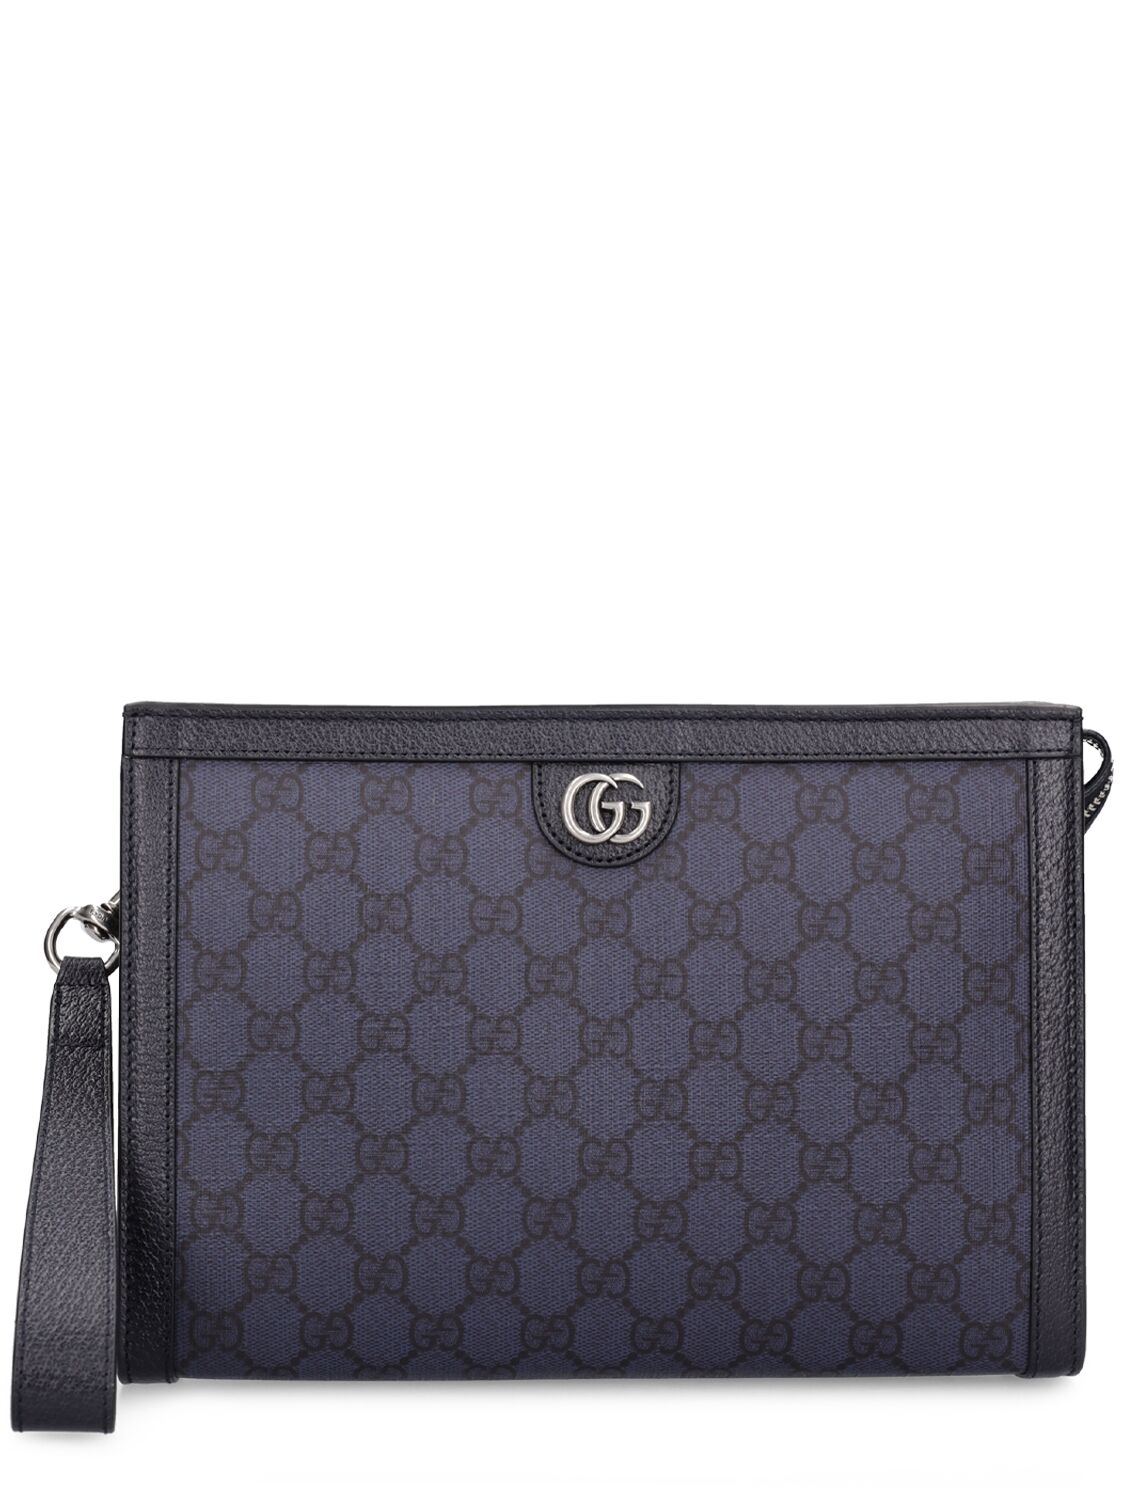 Image of Ophidia Gg Supreme Pouch